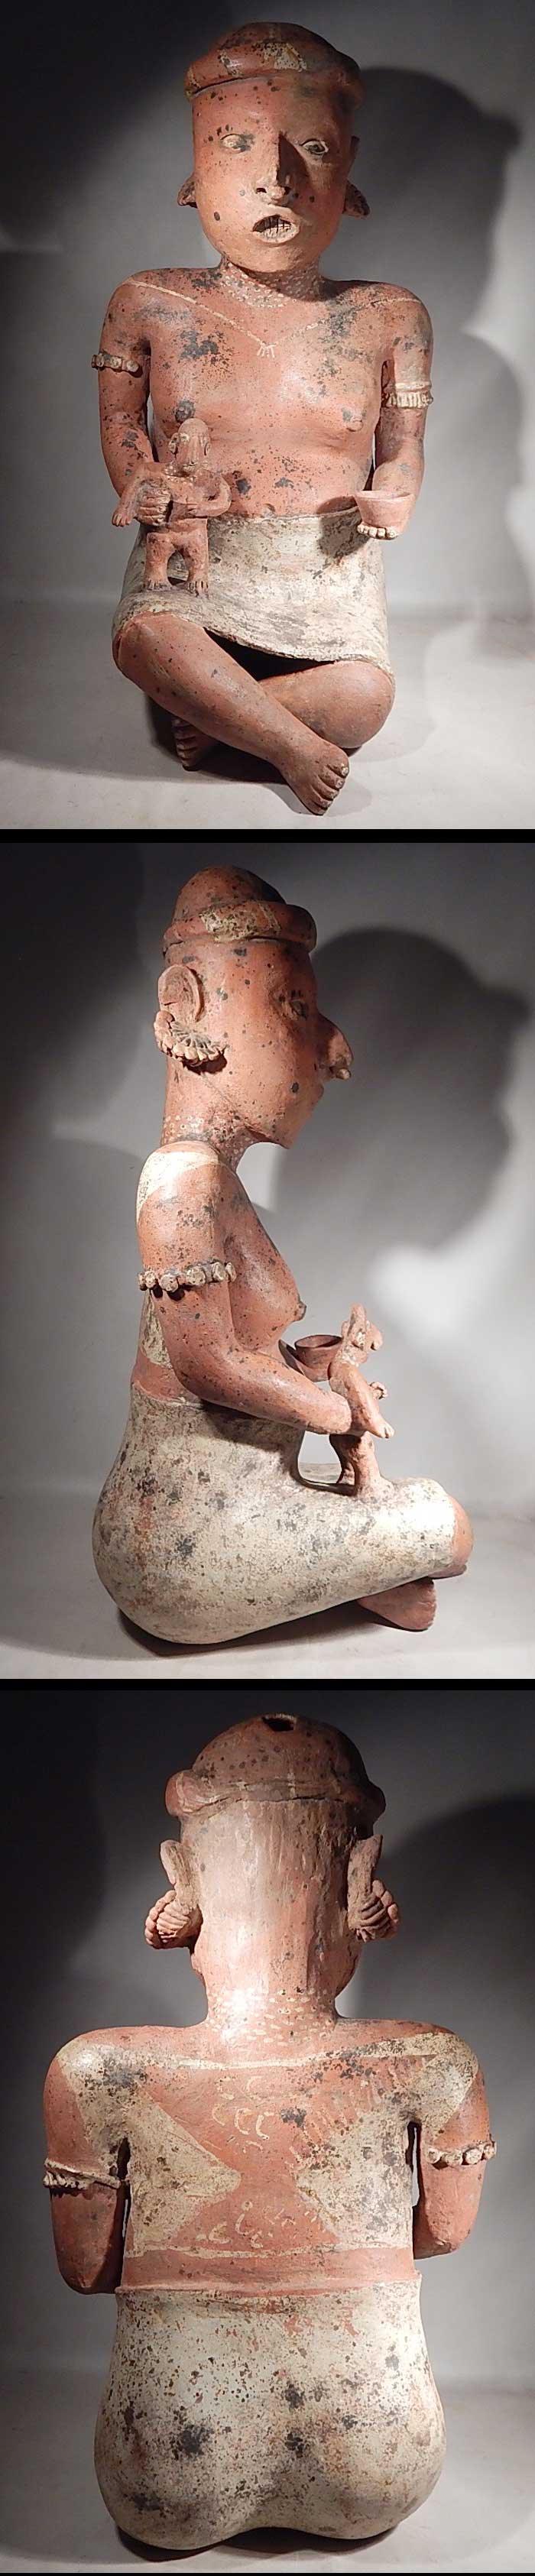 Pre-Columbian Nayarit Monumental Seated Artisan Artist Ancient West Mexico